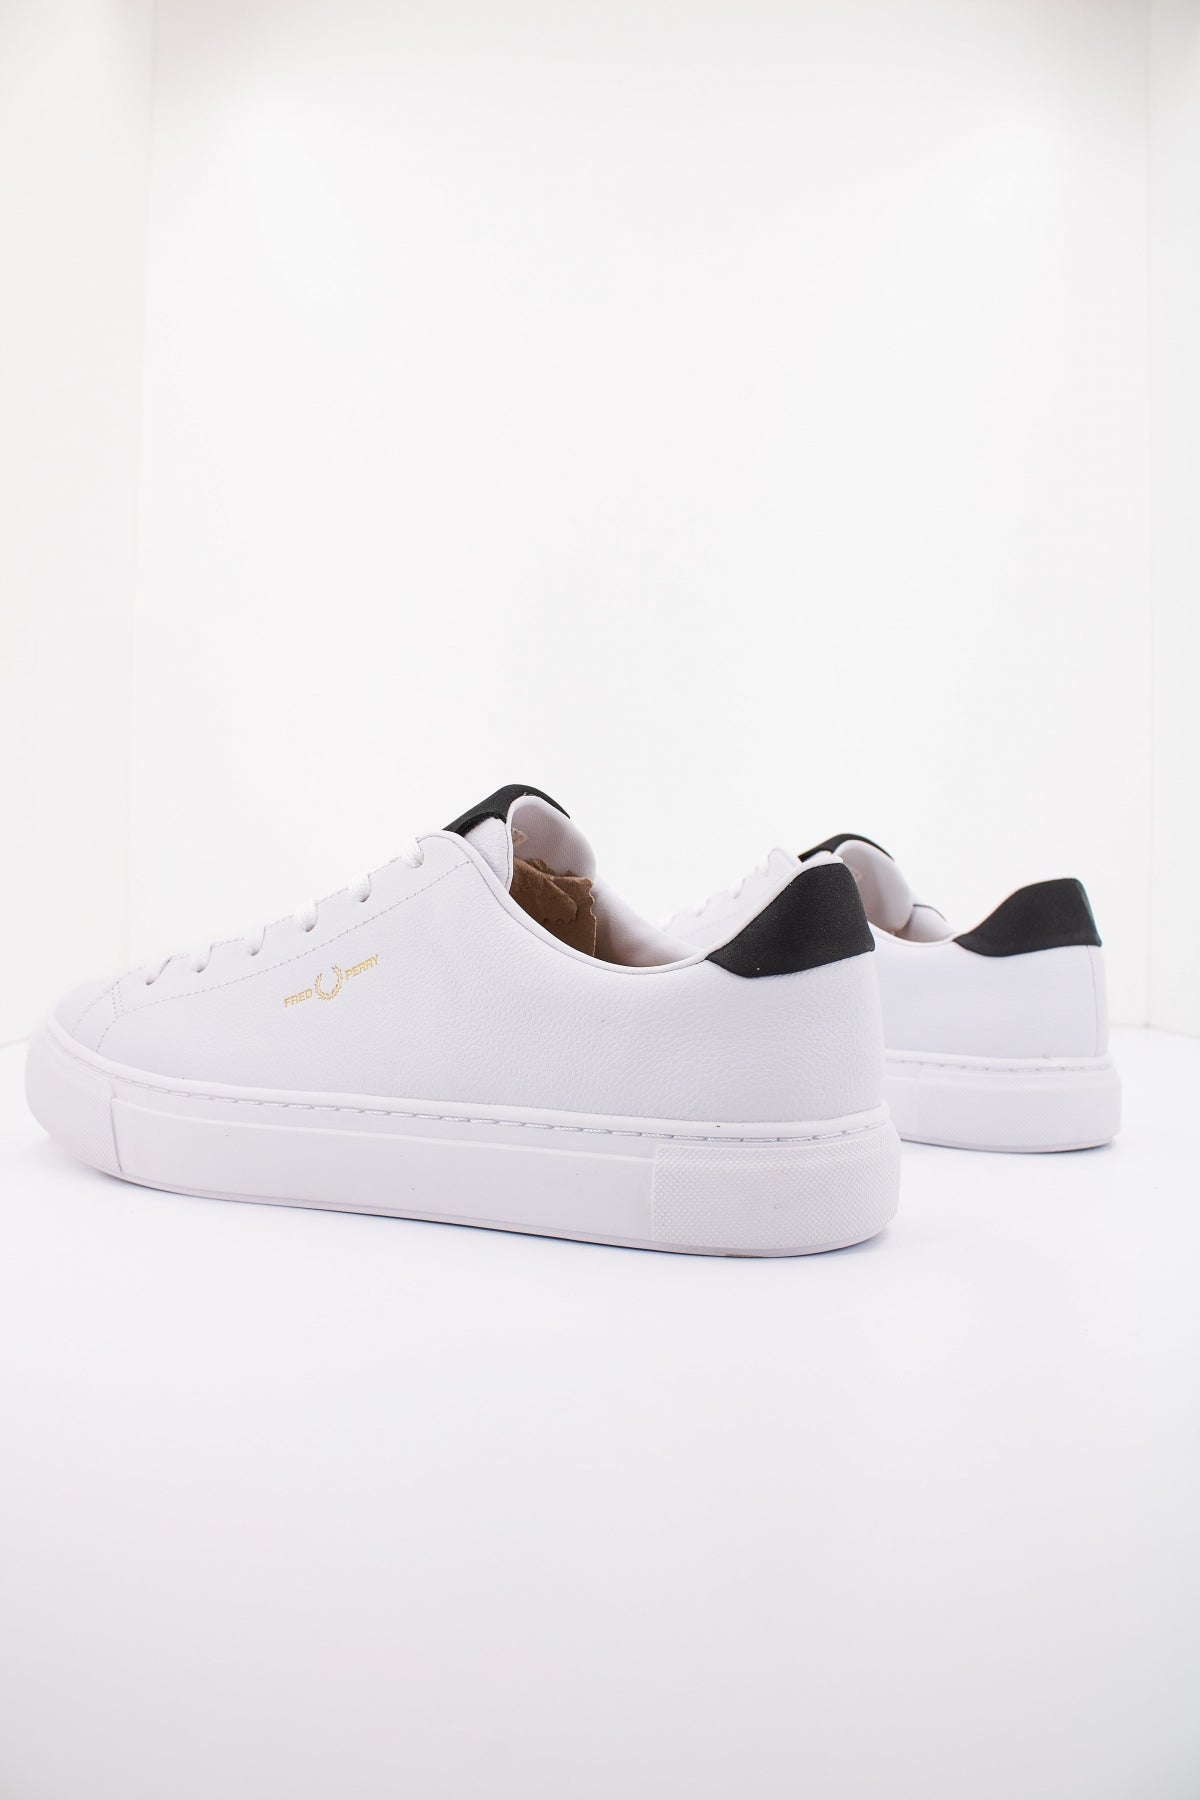 FRED PERRY B TUMBLED LEATHER en color BLANCO  (3)